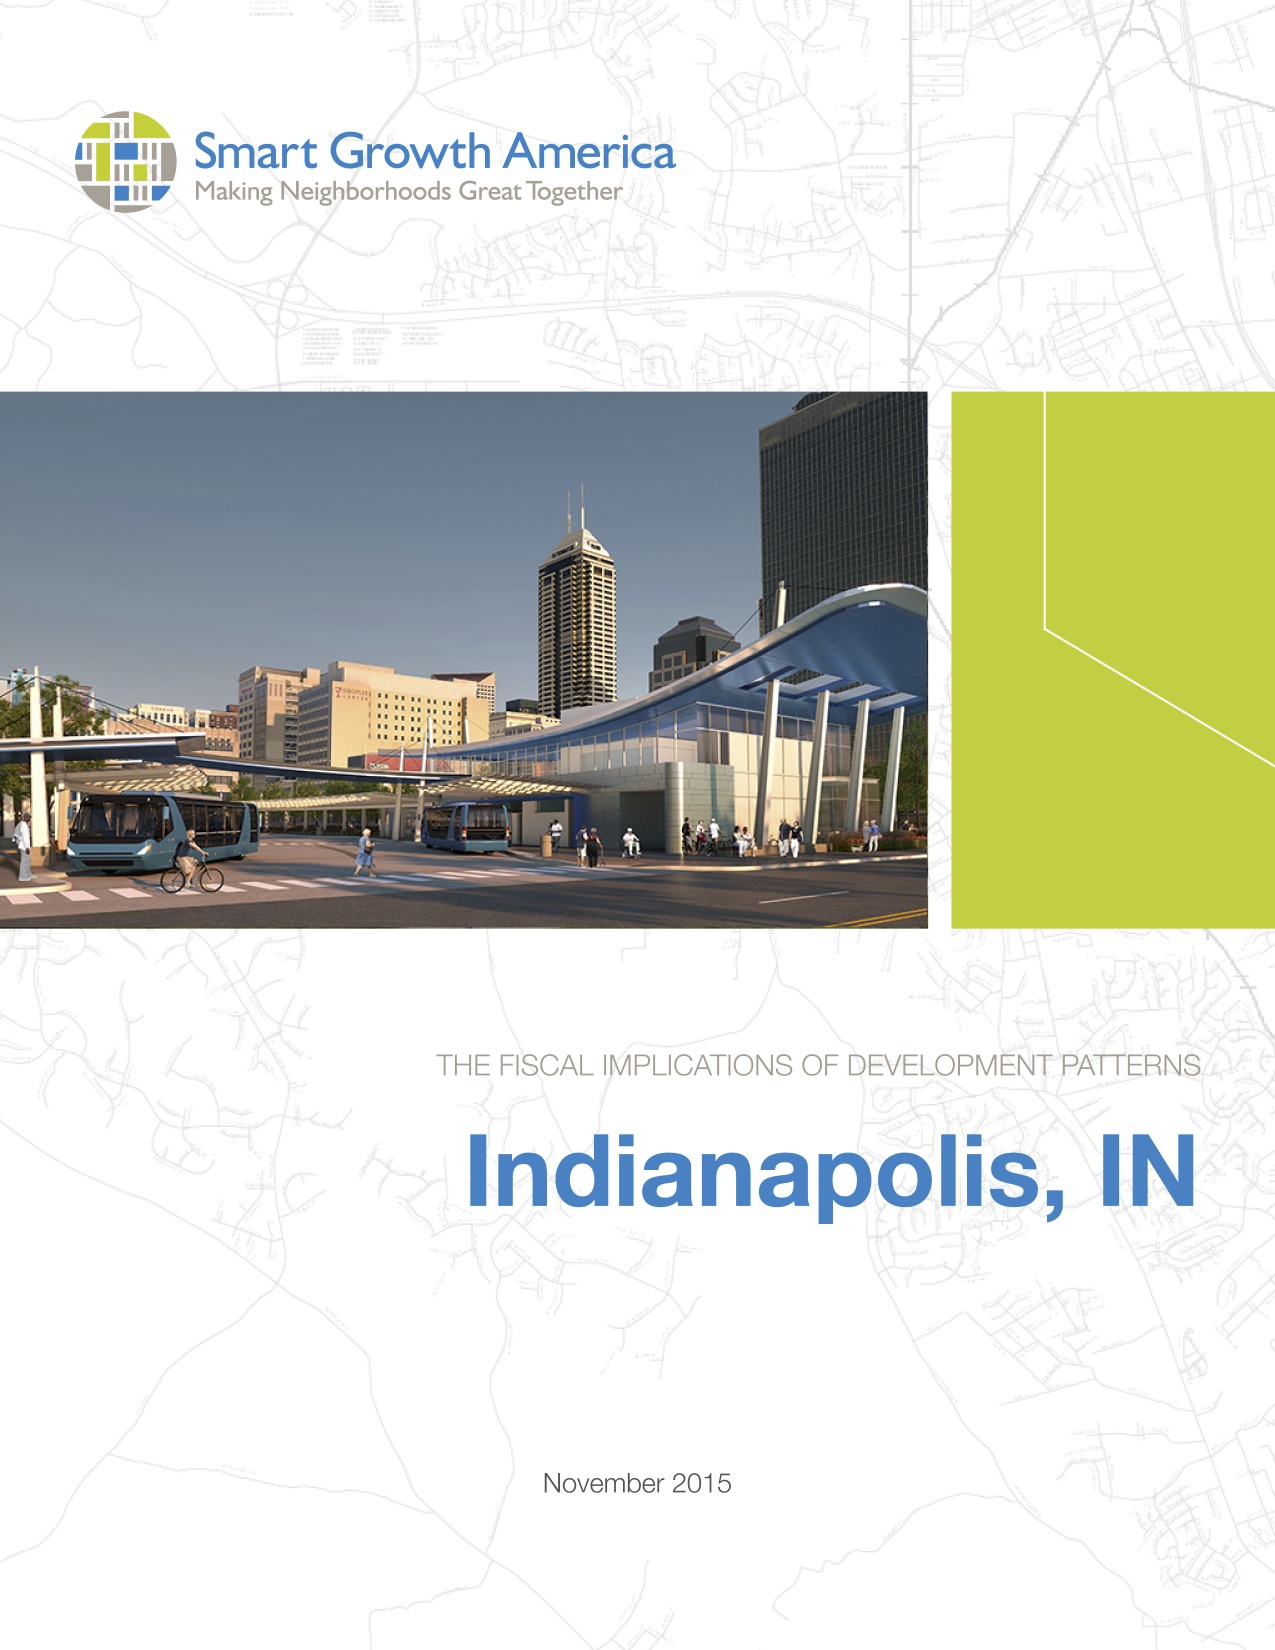 The Fiscal Implications: Indianapolis, IN